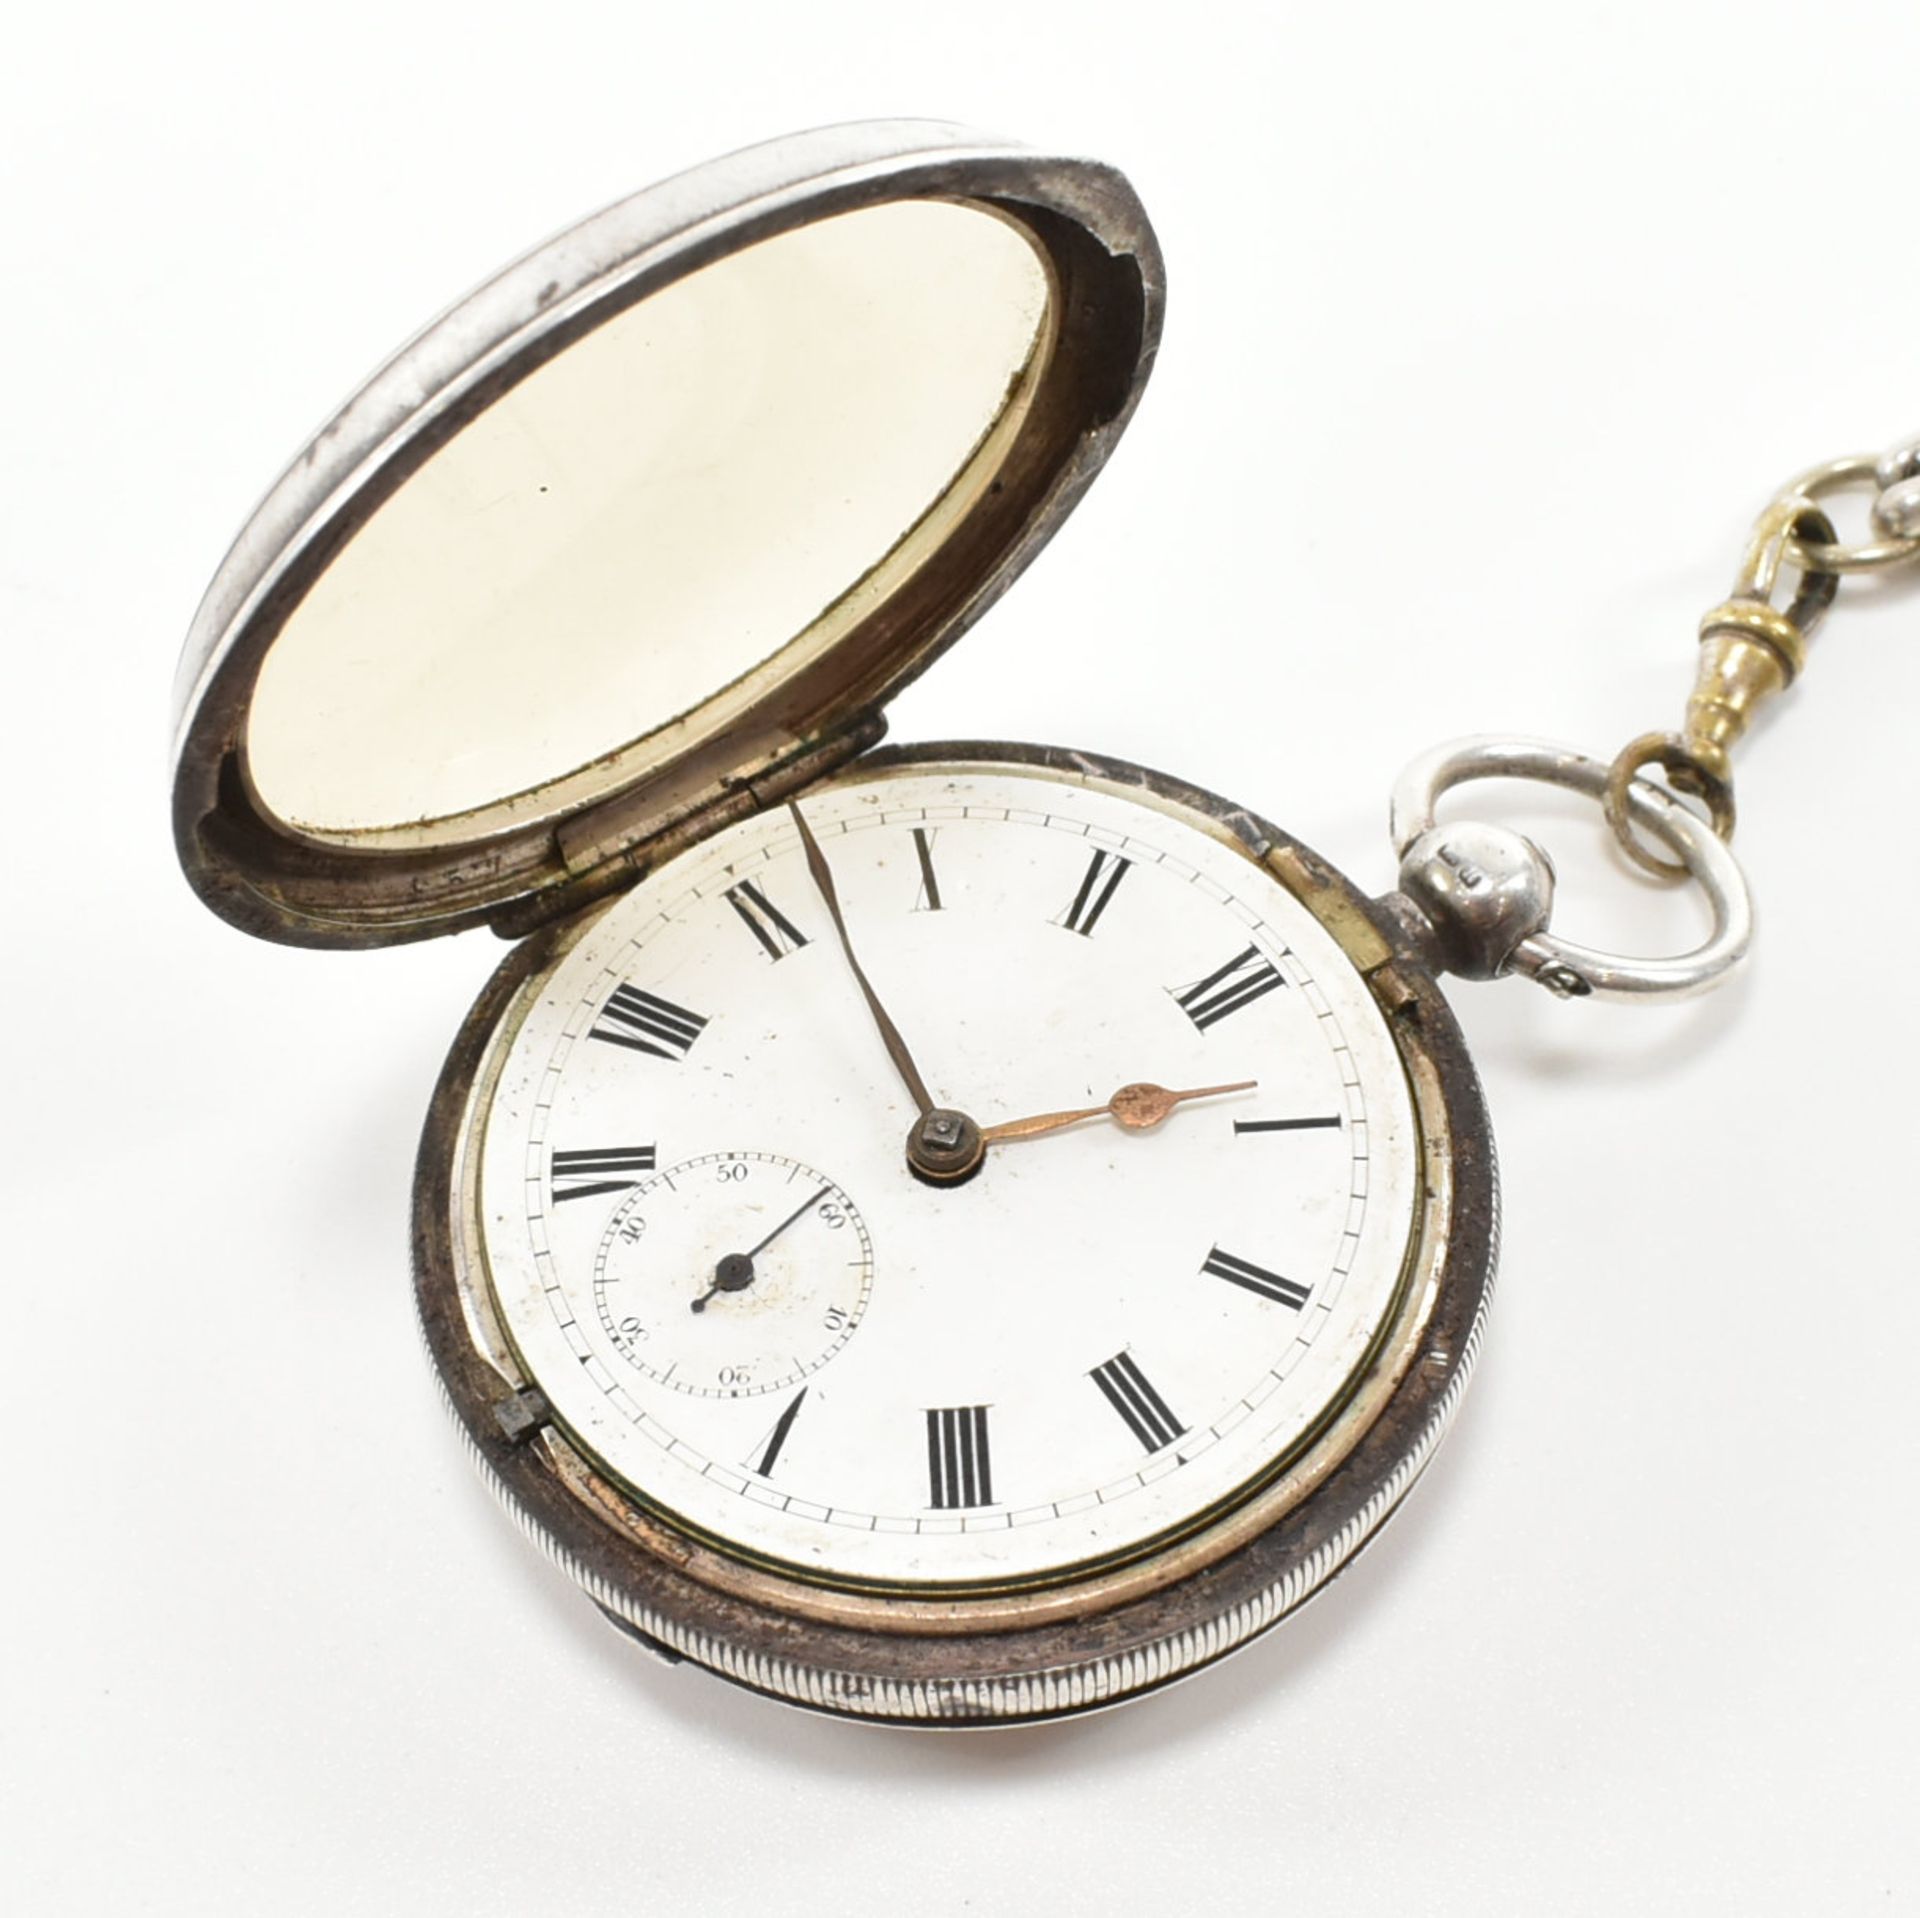 EARLY 20TH CENTURY 1901 HALLMARKED SILVER CASE POCKET WATCH - Image 13 of 14